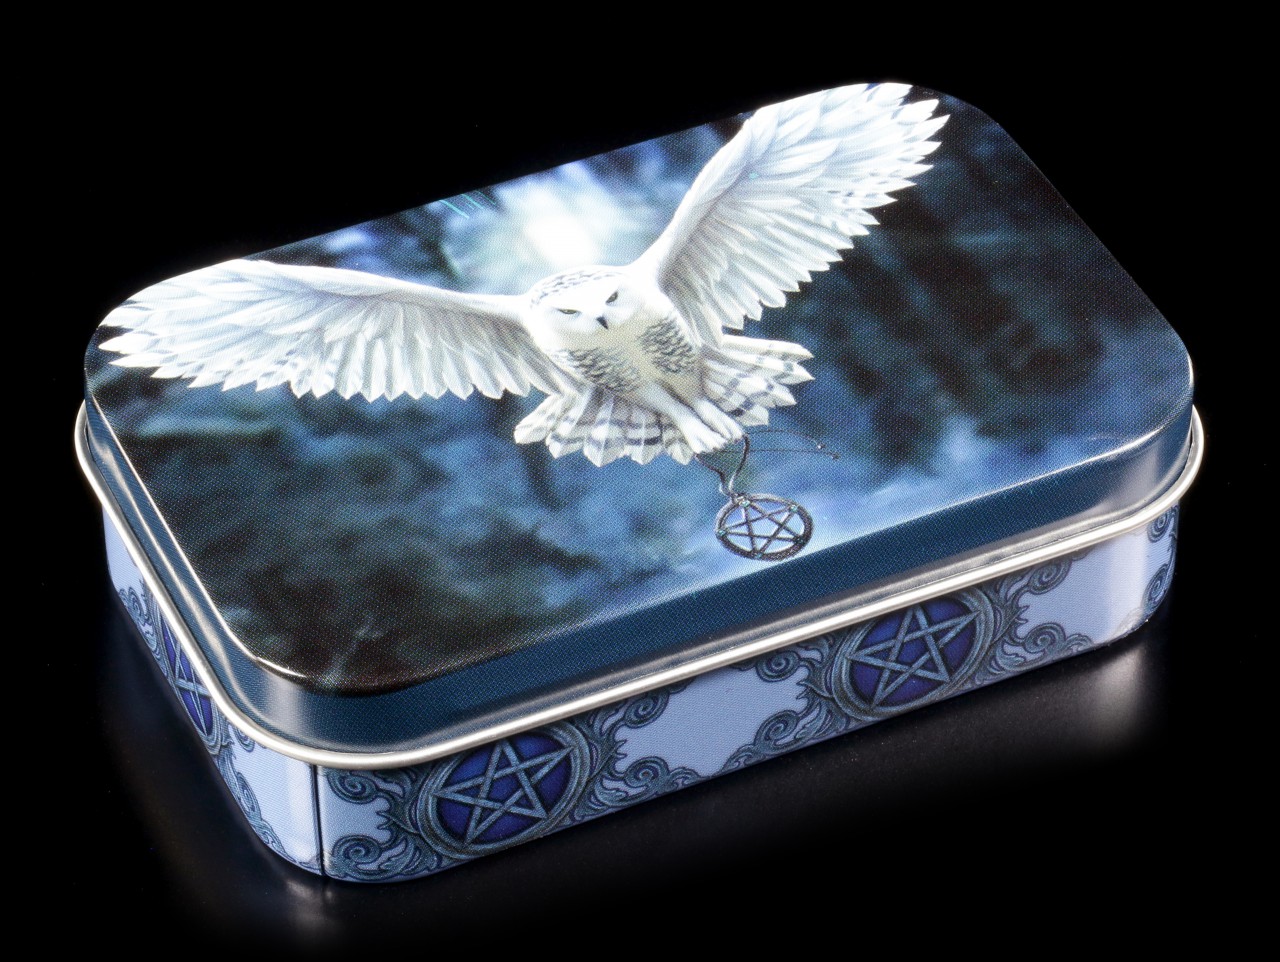 Metal Box with Owl - Awaken your Magic by Anne Stokes